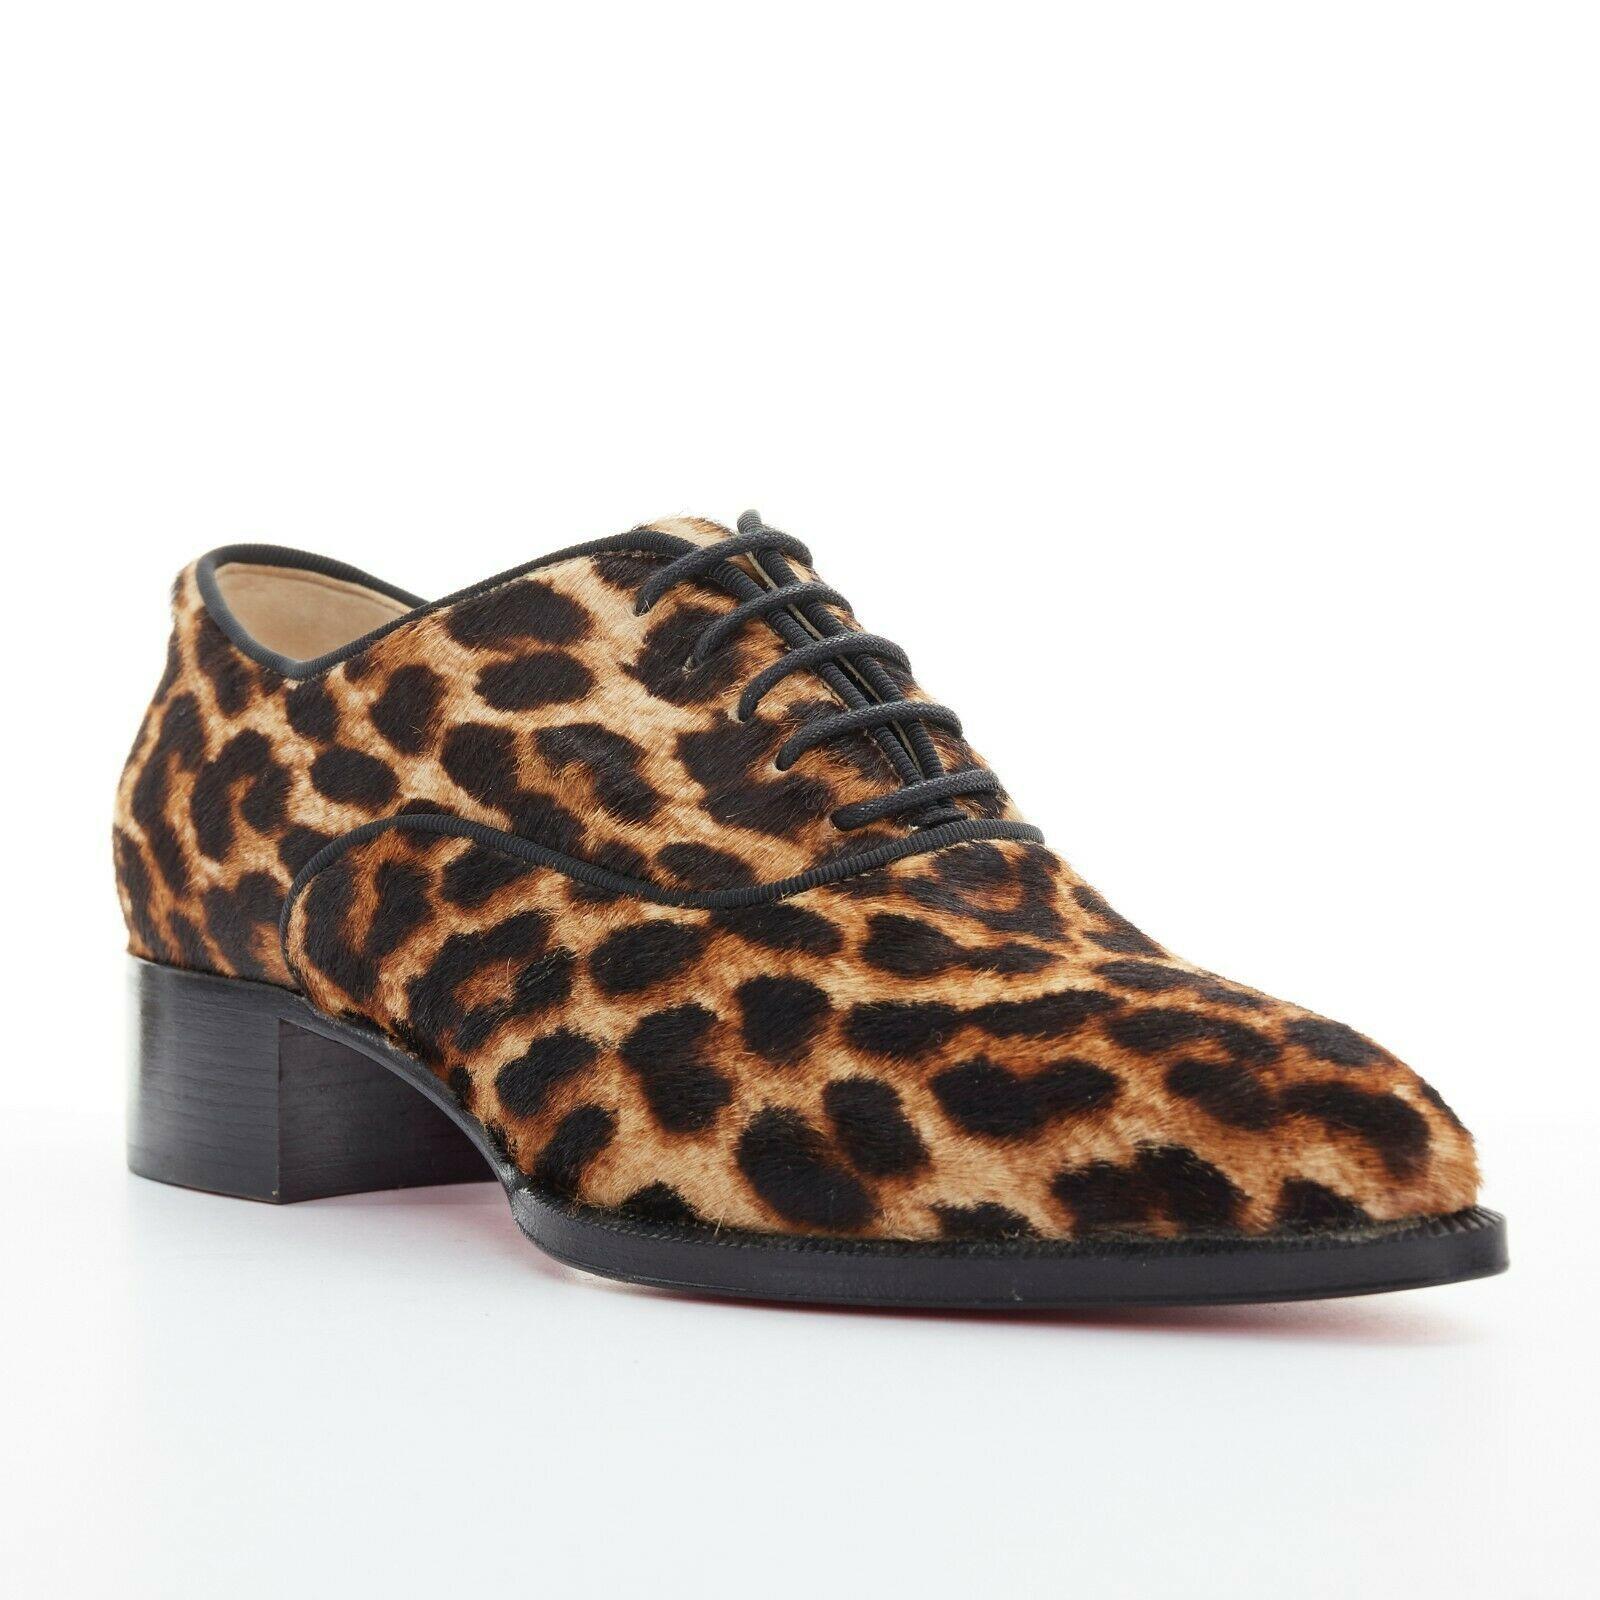 new CHRISTIAN LOUBOUTIN Zazou leopard print calfksin point toe laced brogue EU36

CHRISTIAN LOUBOUTIN
Zazou brogue. Brown leopard spot print. Calf hair leather upper. Black grosgrain piping. 4-eyelet lace front. Pointed toe. Black stacked wooden